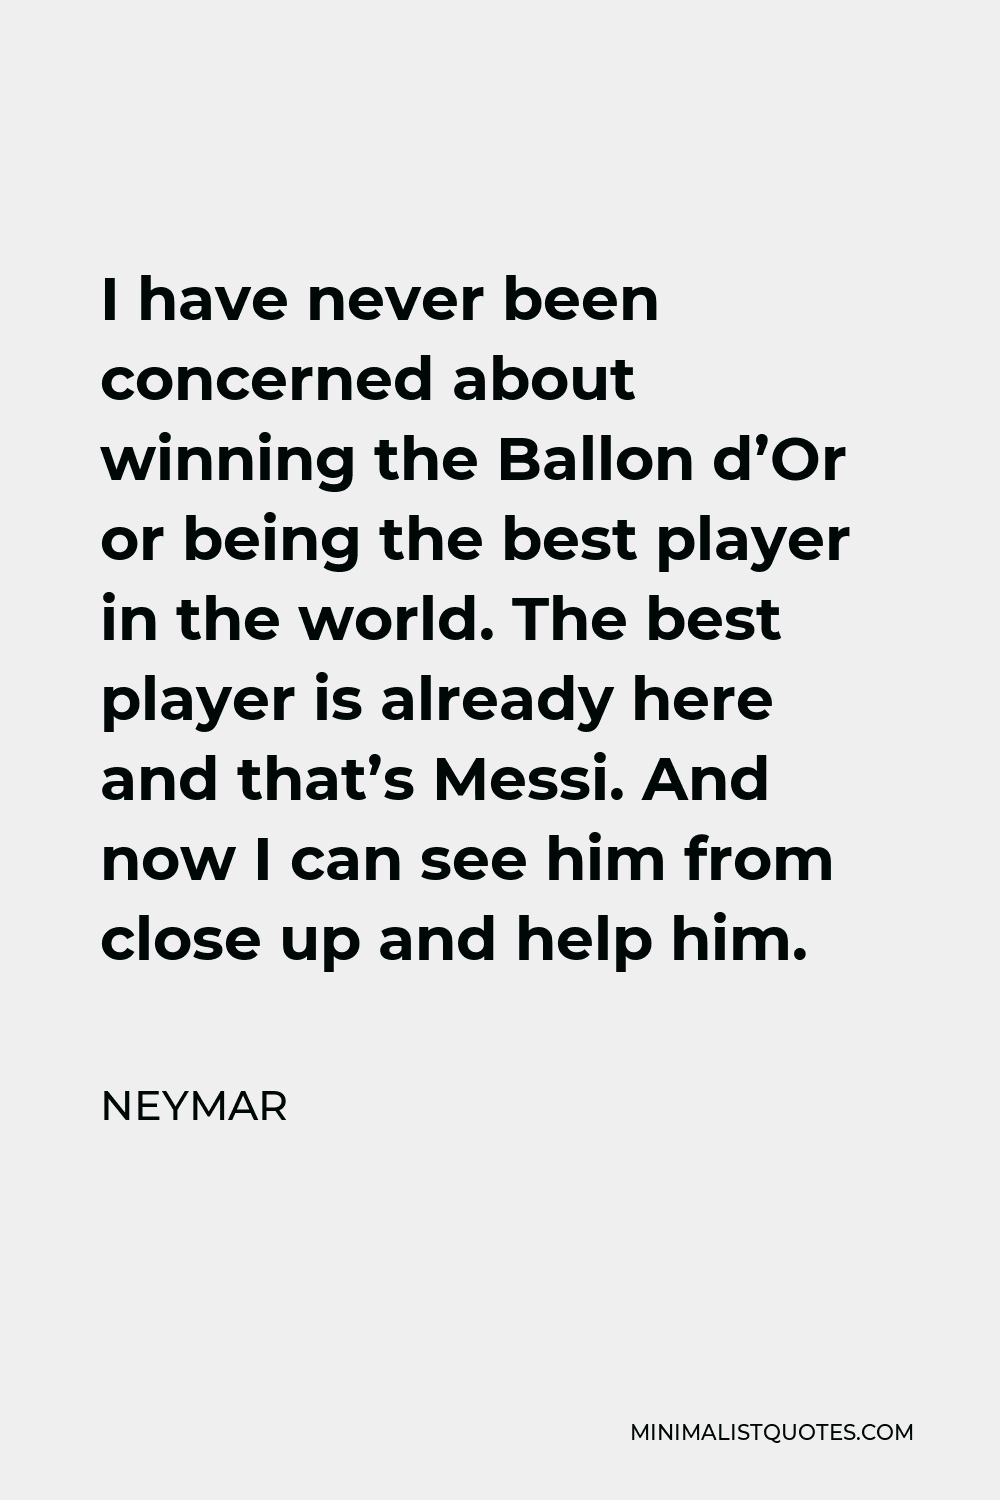 Neymar Quote - I have never been concerned about winning the Ballon d’Or or being the best player in the world. The best player is already here and that’s Messi. And now I can see him from close up and help him.